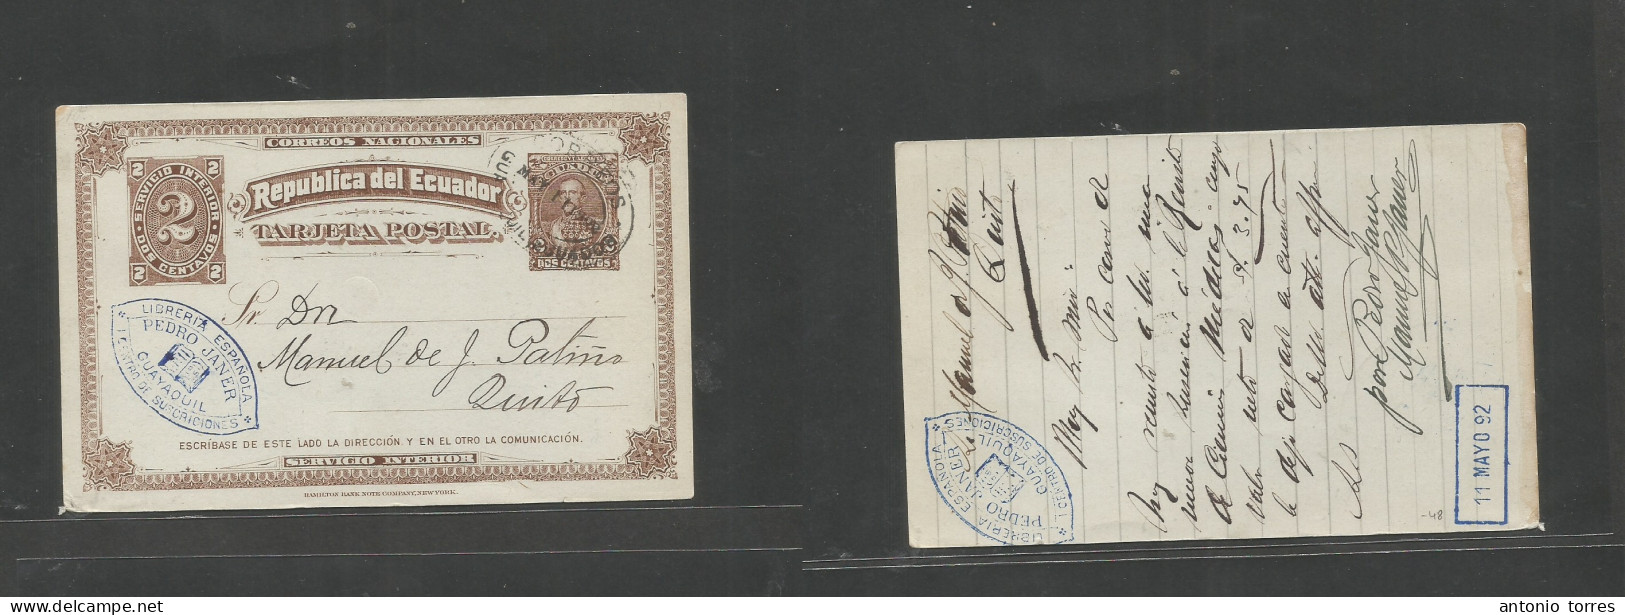 Ecuador. 1892 (11 Mayo) Guayaquil - Quito. Local 2c Brown / Greenish Illustrated Stationary Card. Fine Scarce Correct Ci - Equateur